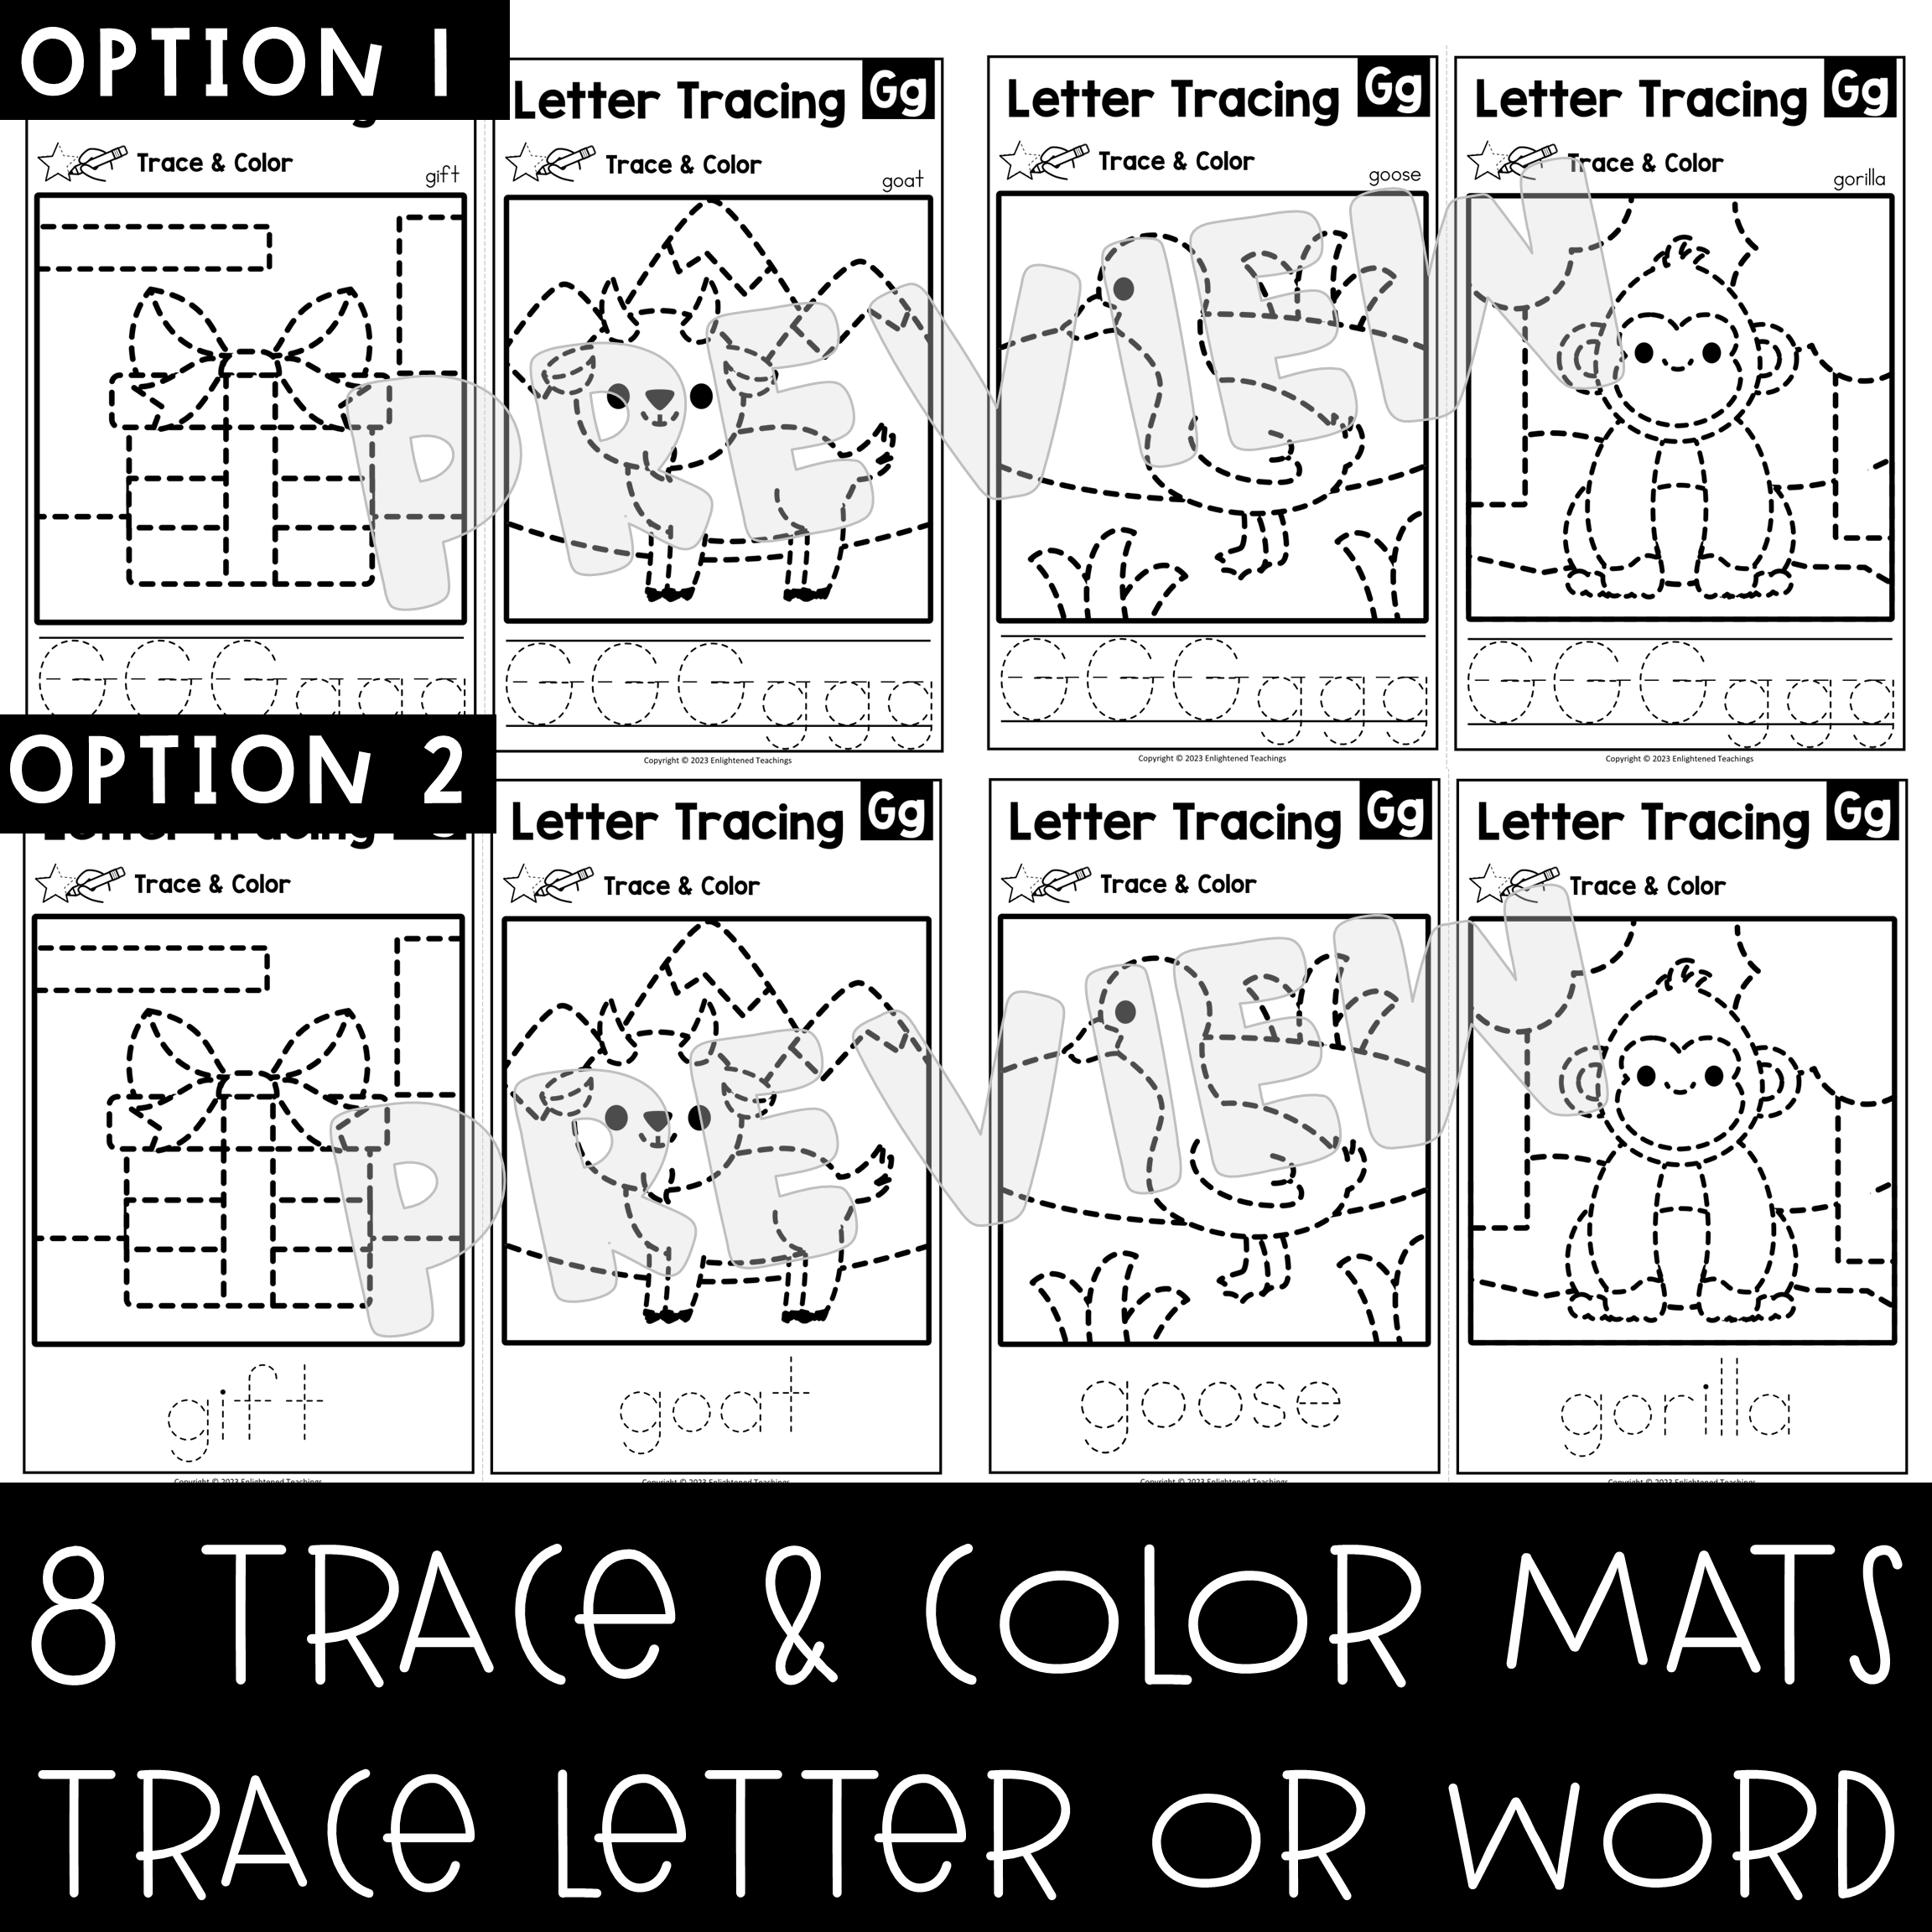 Letter g tracing worksheets letter tracing mats letter g trace color made by teachers